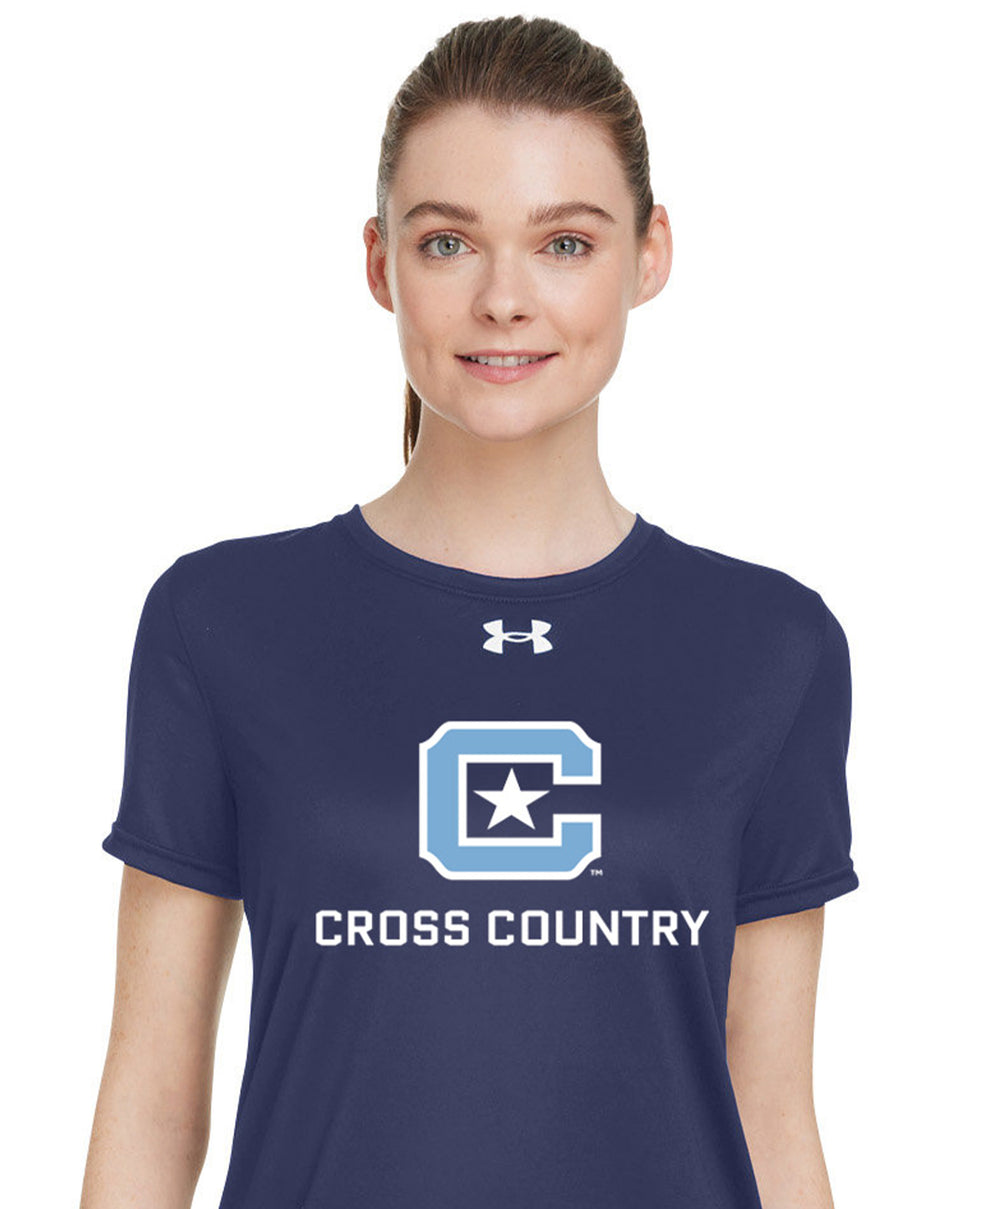 The Citadel, Club Sport - Cross Country, Under Armour Ladies' Team Tech T-Shirt- Navy